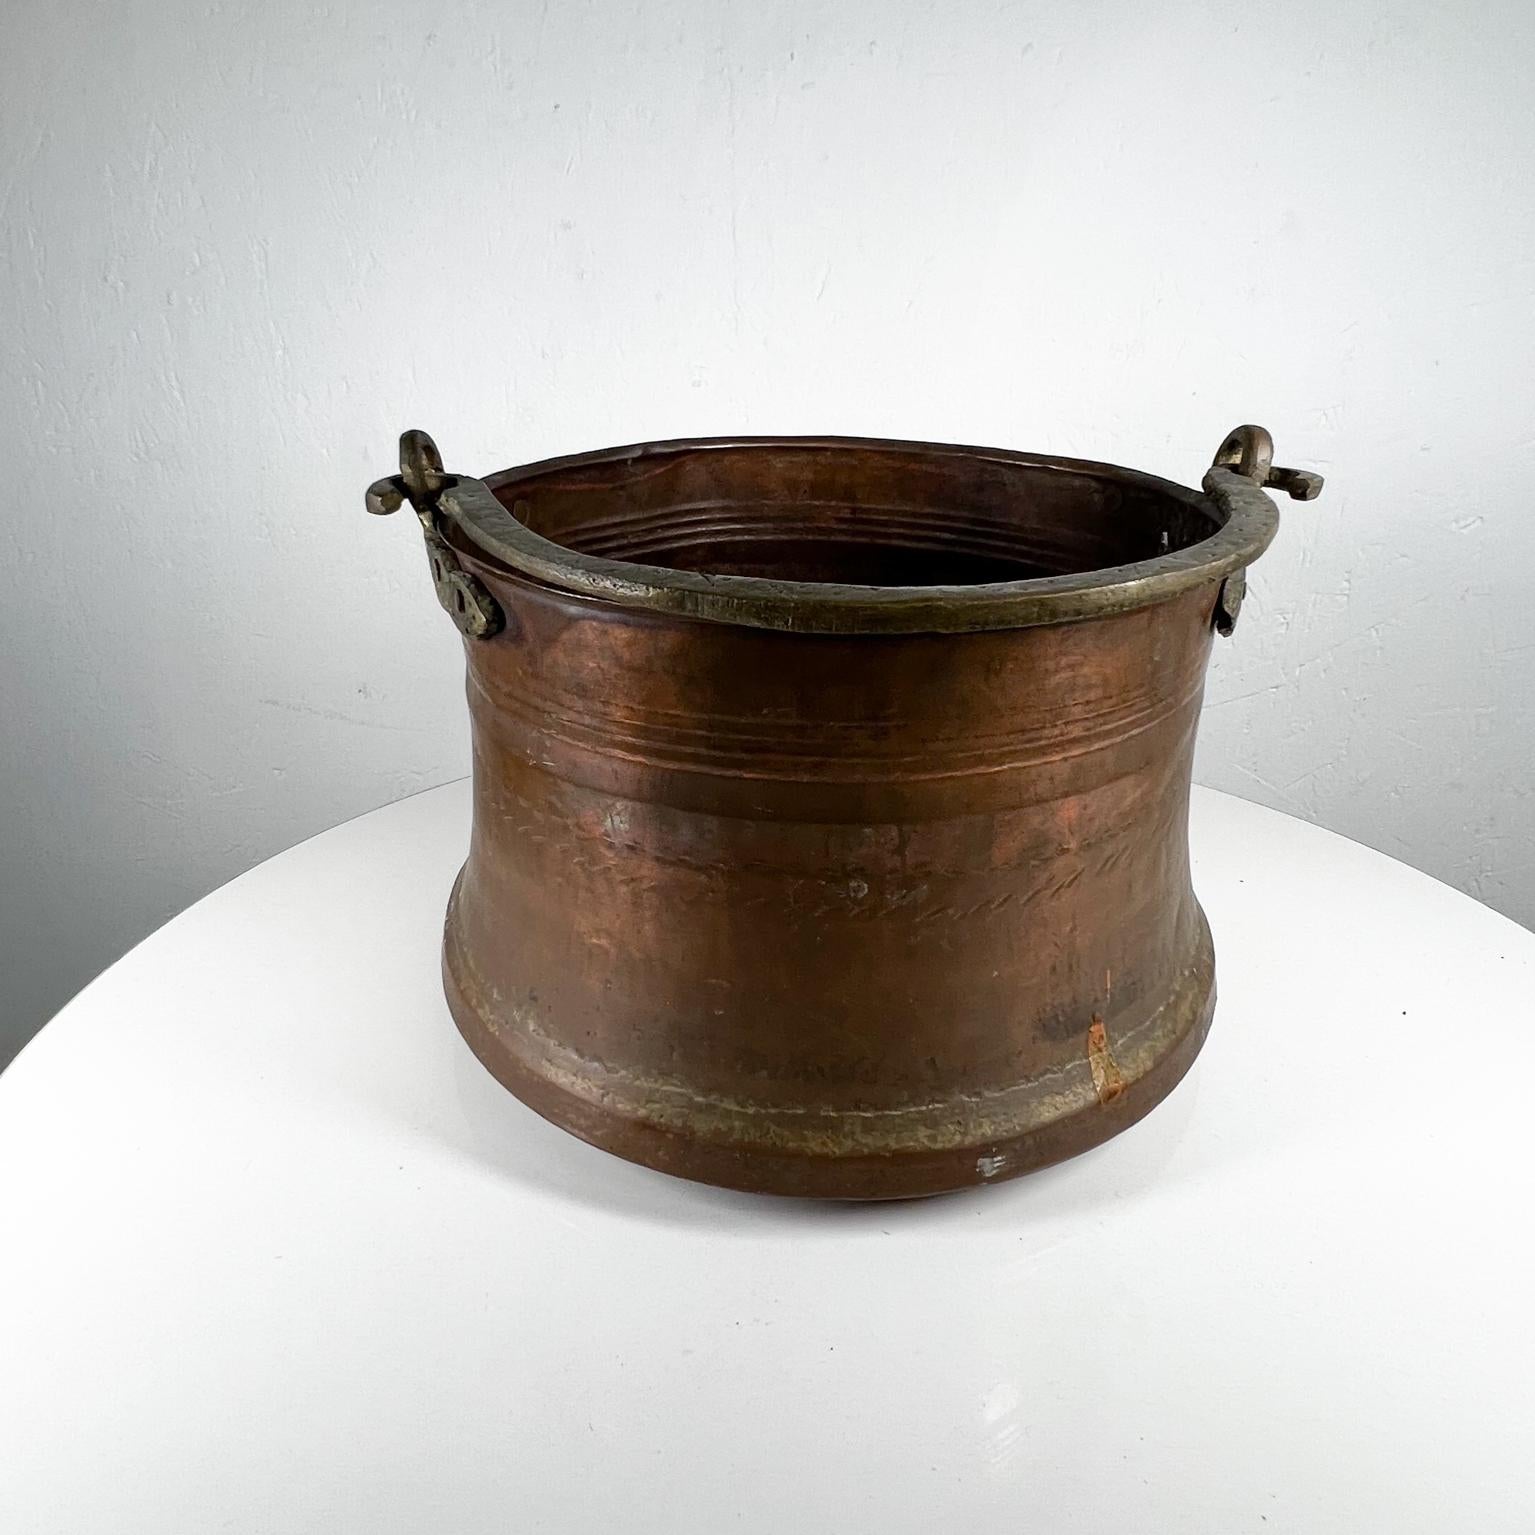 Vintage bucket pail with handle in copper-brass.
Decorative item.11.75 diameter x 8.25 tall
No label present.
Patina present vintage condition unrestored. 
Refer to images presented here.